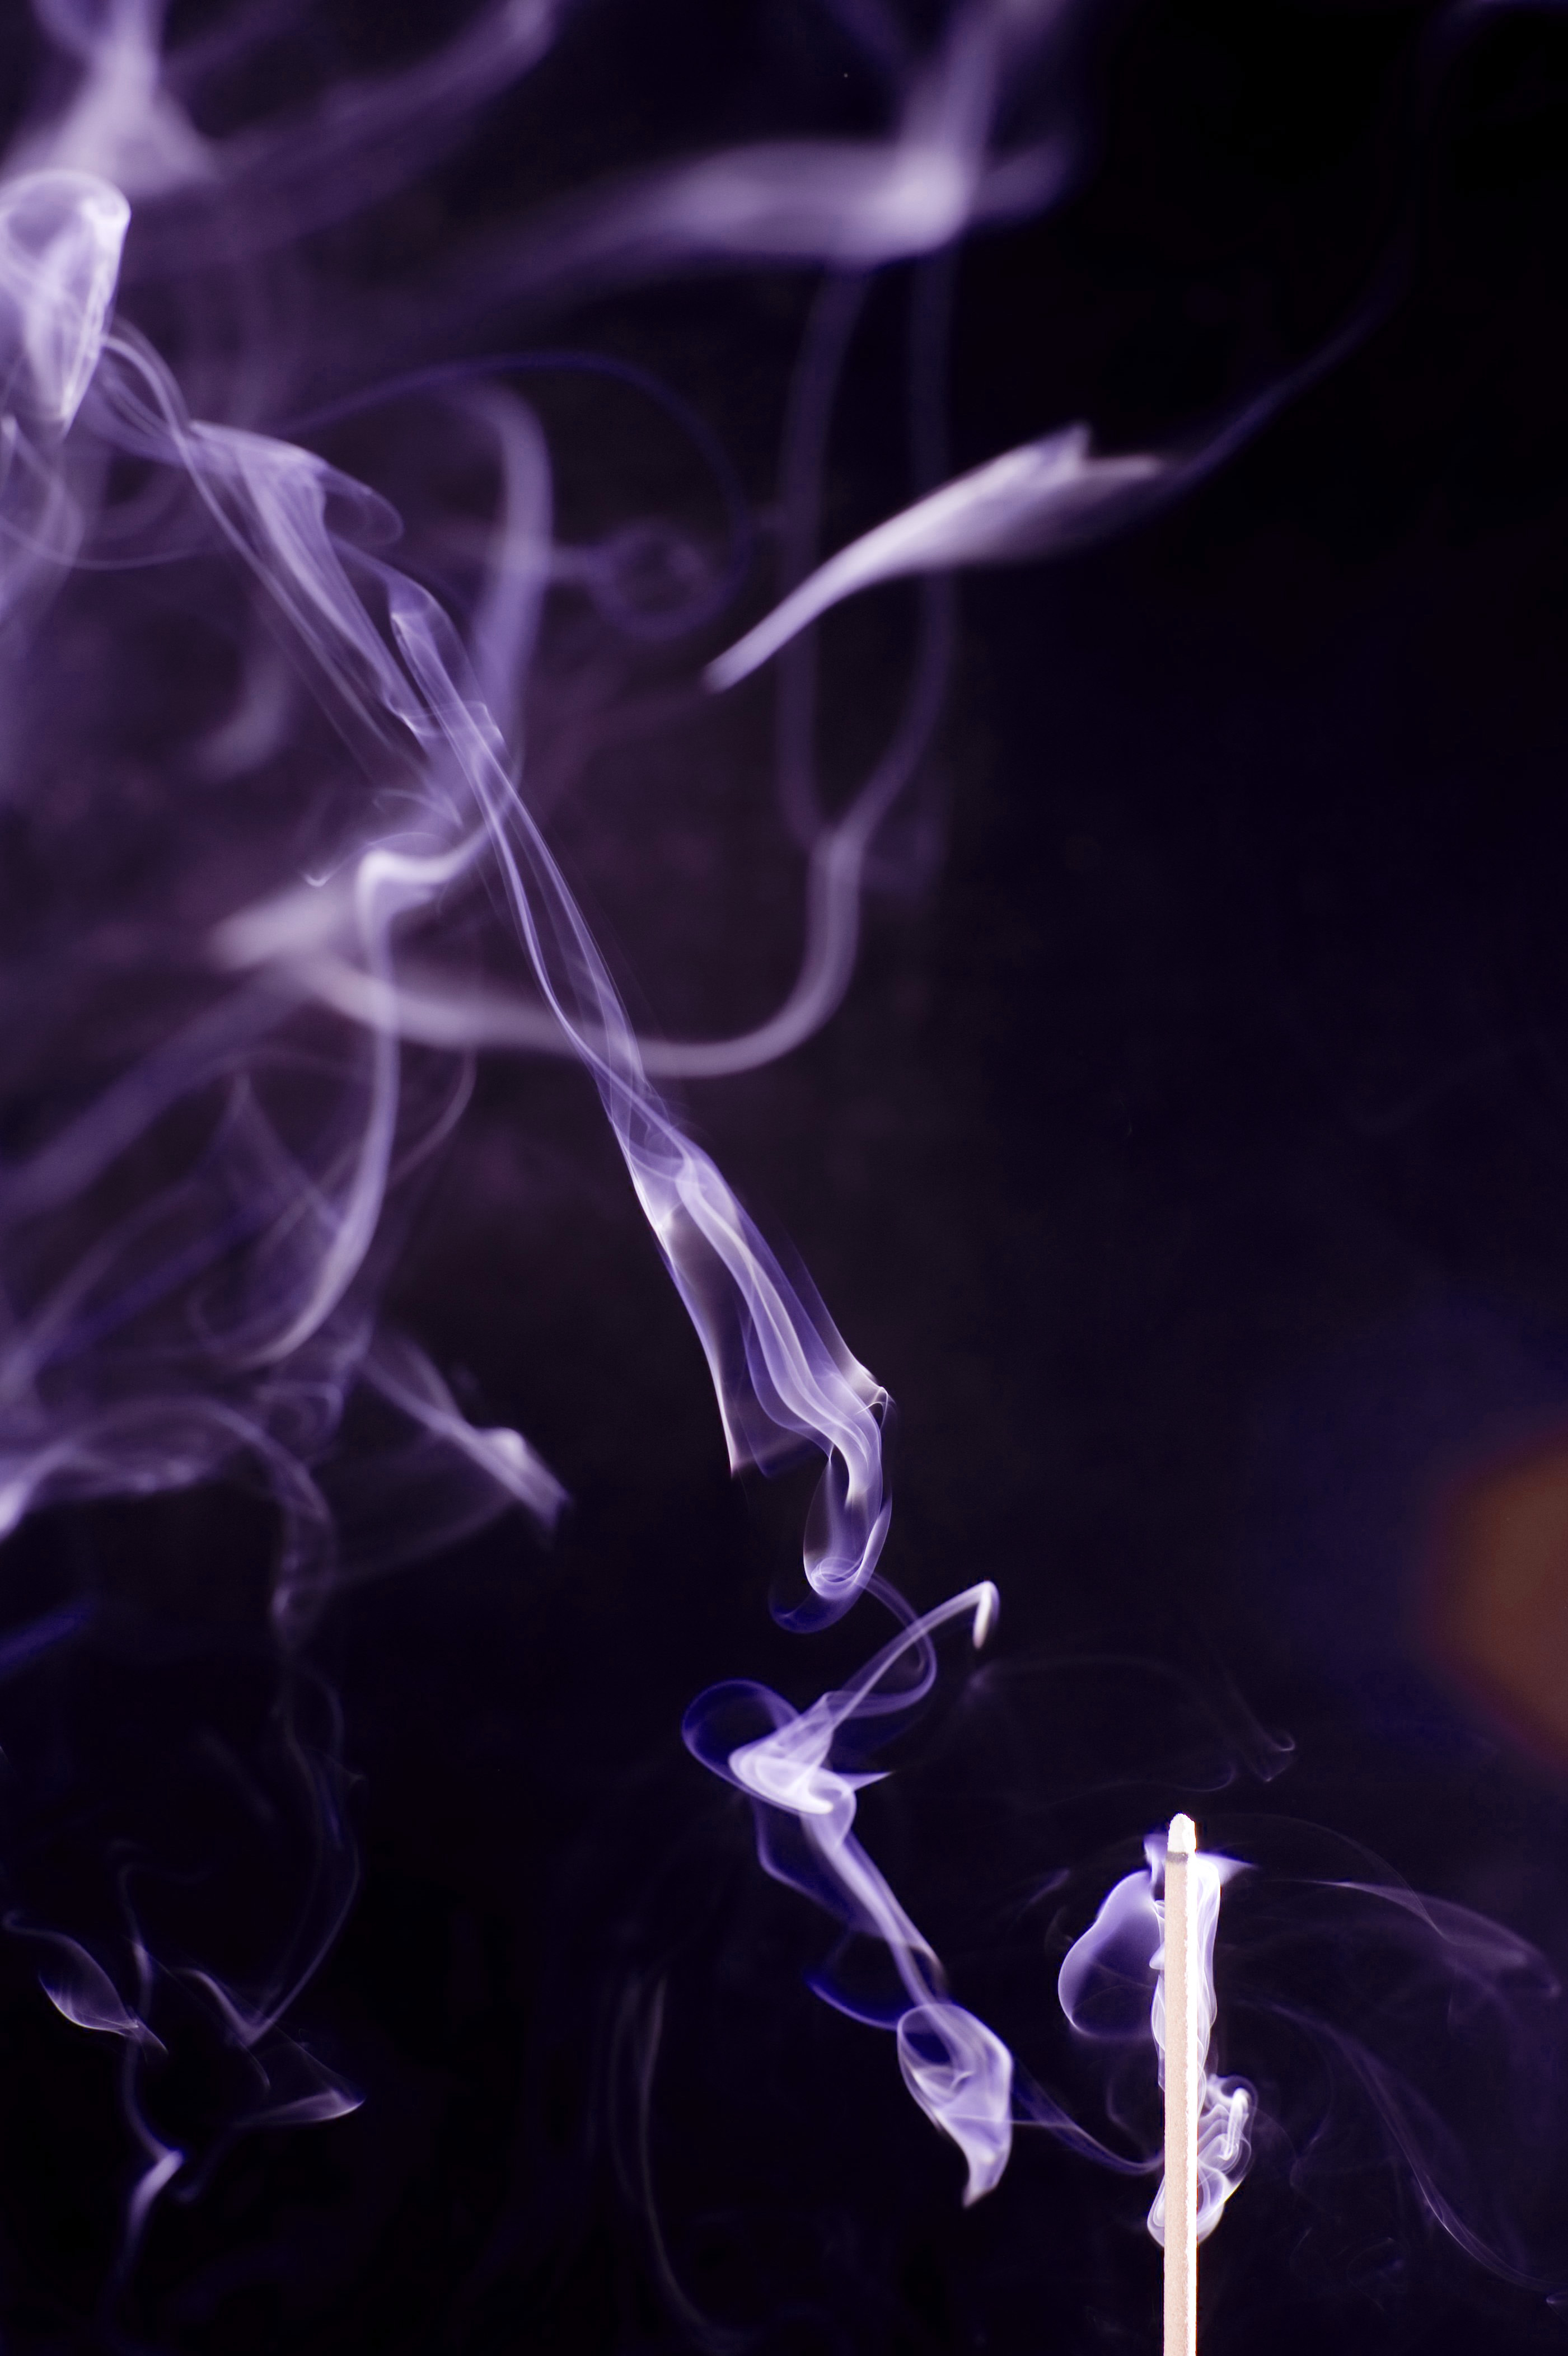 smoking incense. Free background and textures